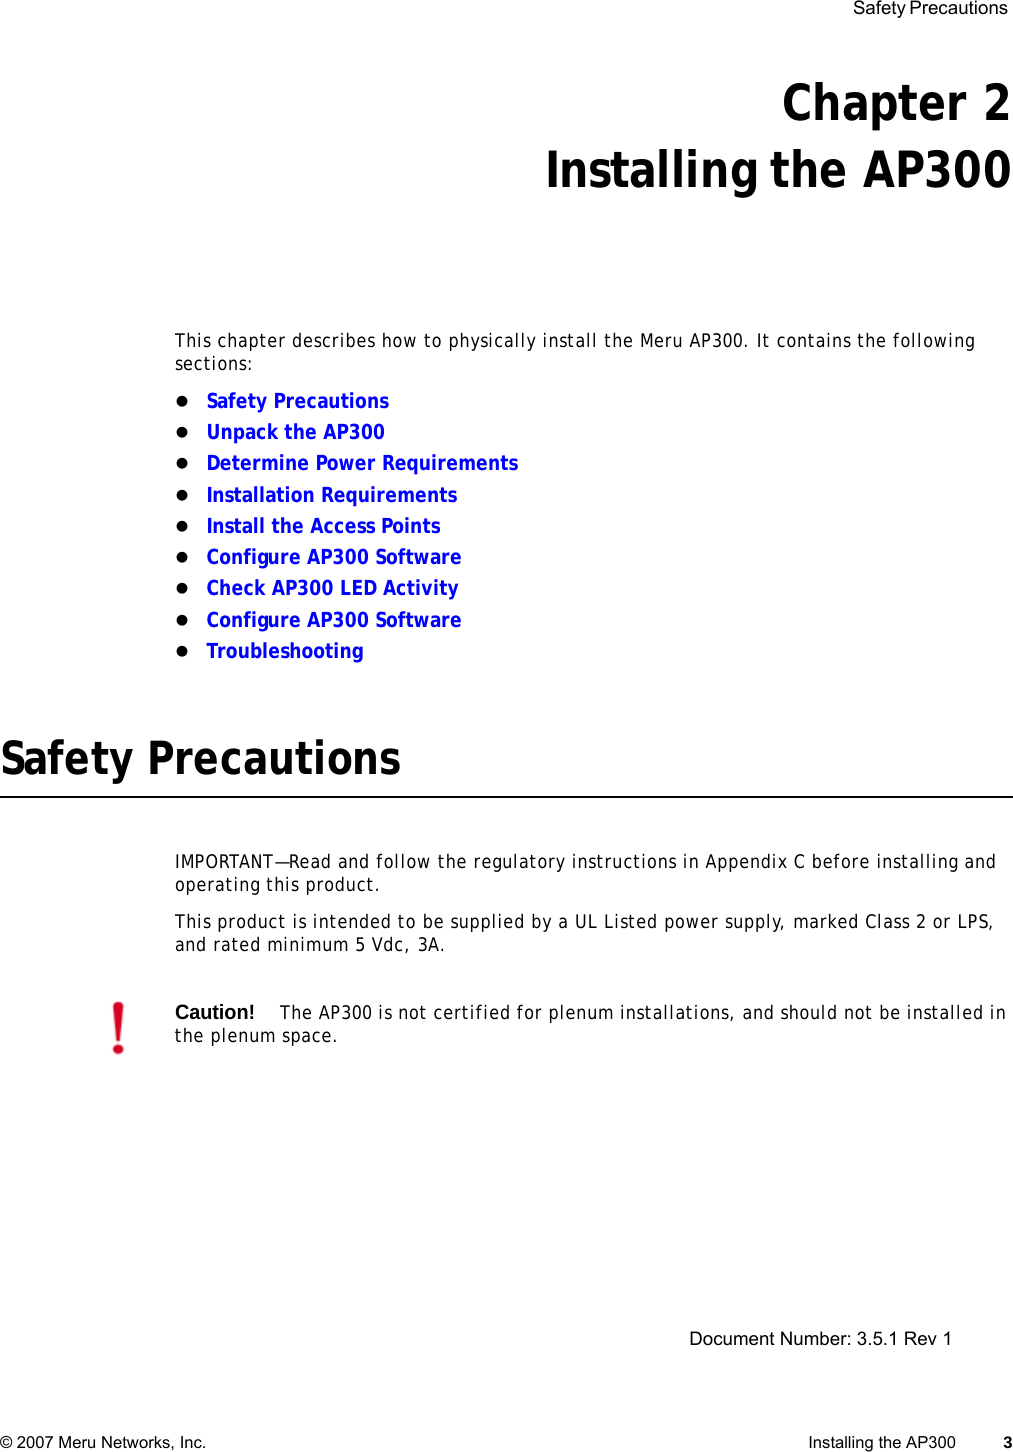  Safety Precautions © 2007 Meru Networks, Inc. Installing the AP300 3 Chapter 2Installing the AP300This chapter describes how to physically install the Meru AP300. It contains the following sections:zSafety PrecautionszUnpack the AP300zDetermine Power RequirementszInstallation RequirementszInstall the Access PointszConfigure AP300 SoftwarezCheck AP300 LED ActivityzConfigure AP300 SoftwarezTroubleshootingSafety PrecautionsIMPORTANT—Read and follow the regulatory instructions in Appendix C before installing and operating this product.This product is intended to be supplied by a UL Listed power supply, marked Class 2 or LPS, and rated minimum 5 Vdc, 3A.Caution!The AP300 is not certified for plenum installations, and should not be installed in the plenum space.Document Number: 3.5.1 Rev 1